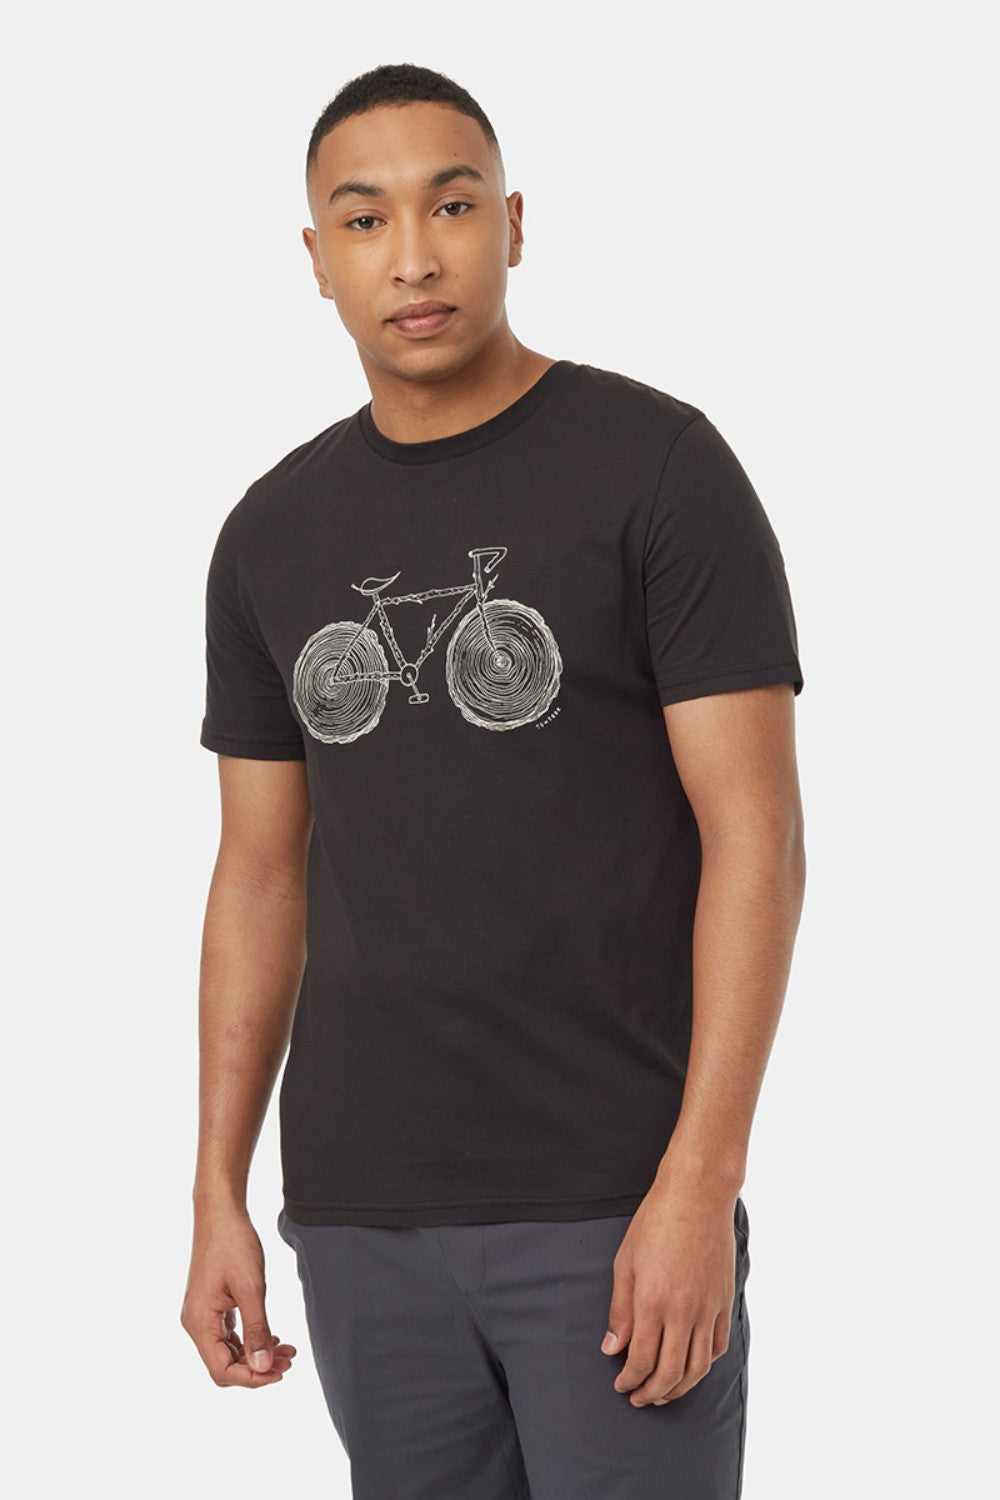 Super breathable lightweight organic cotton T-shirt that is C2C certified and comfortable for everyday wear.